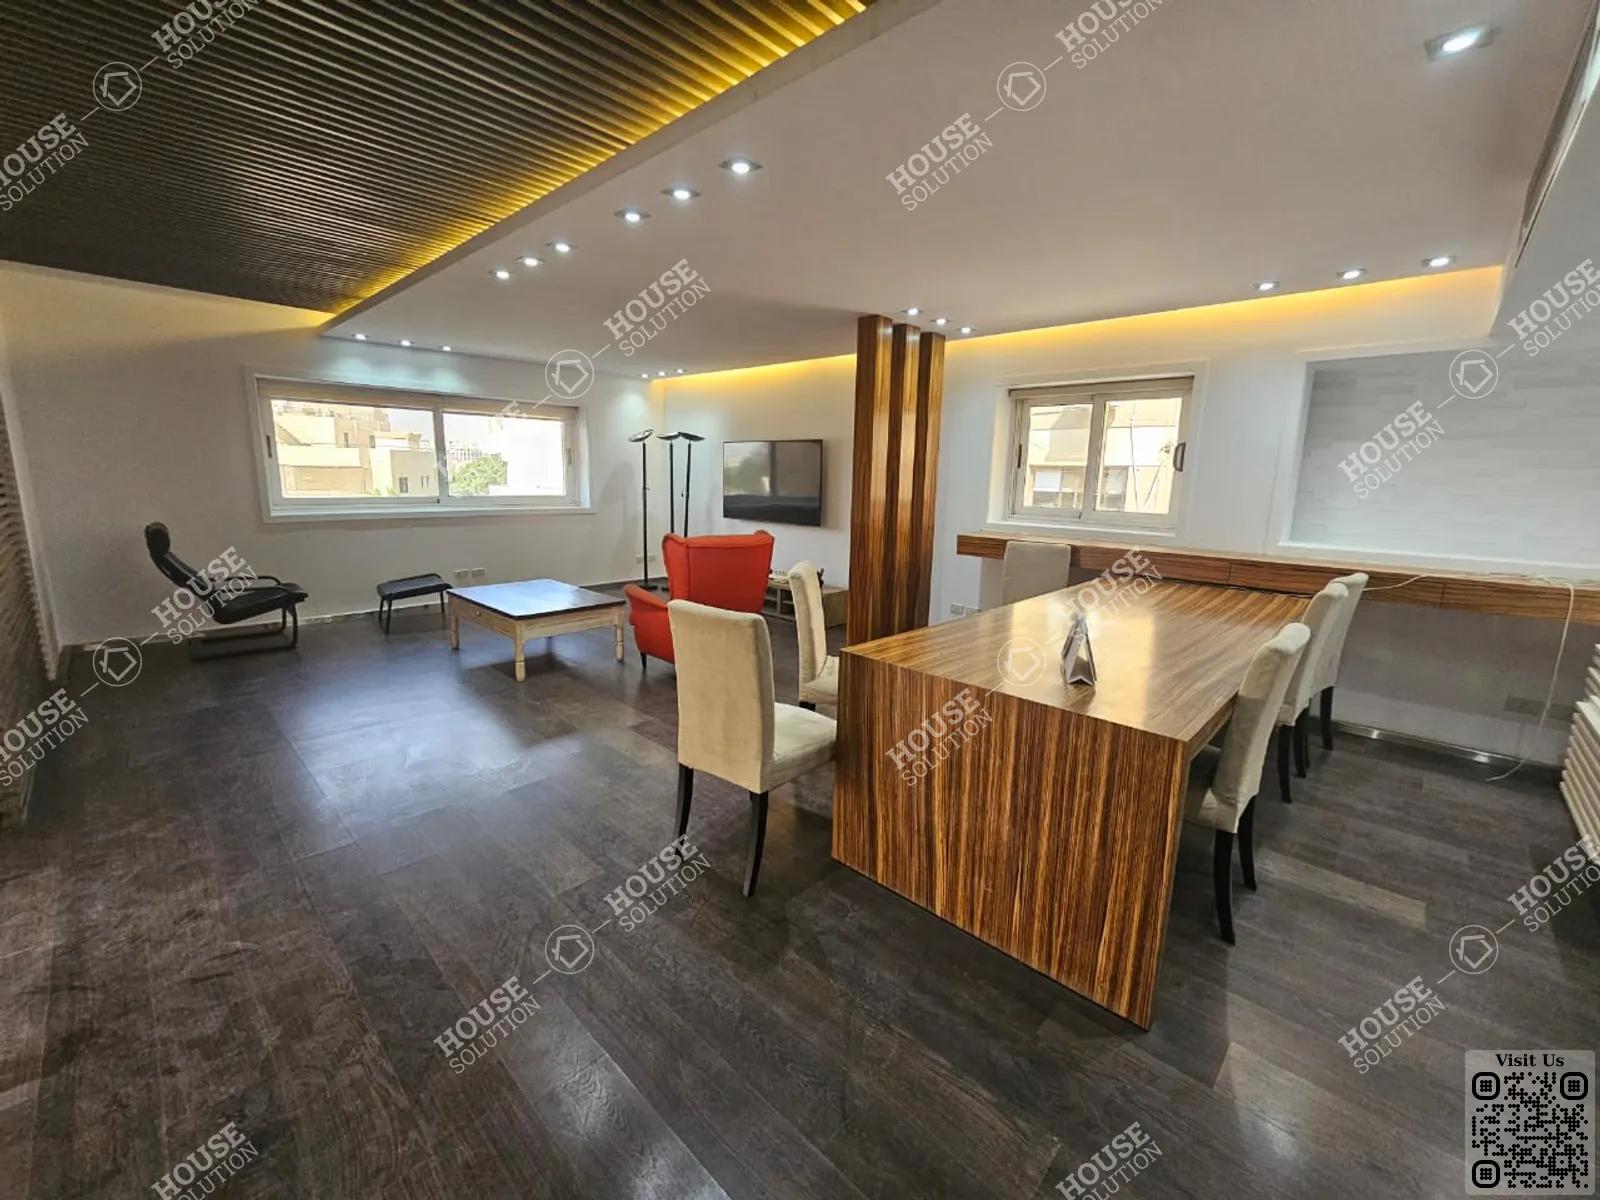 RECEPTION  @ Apartments For Rent In Maadi Maadi Degla Area: 280 m² consists of 4 Bedrooms 5 Bathrooms Modern furnished 5 stars #2504-0